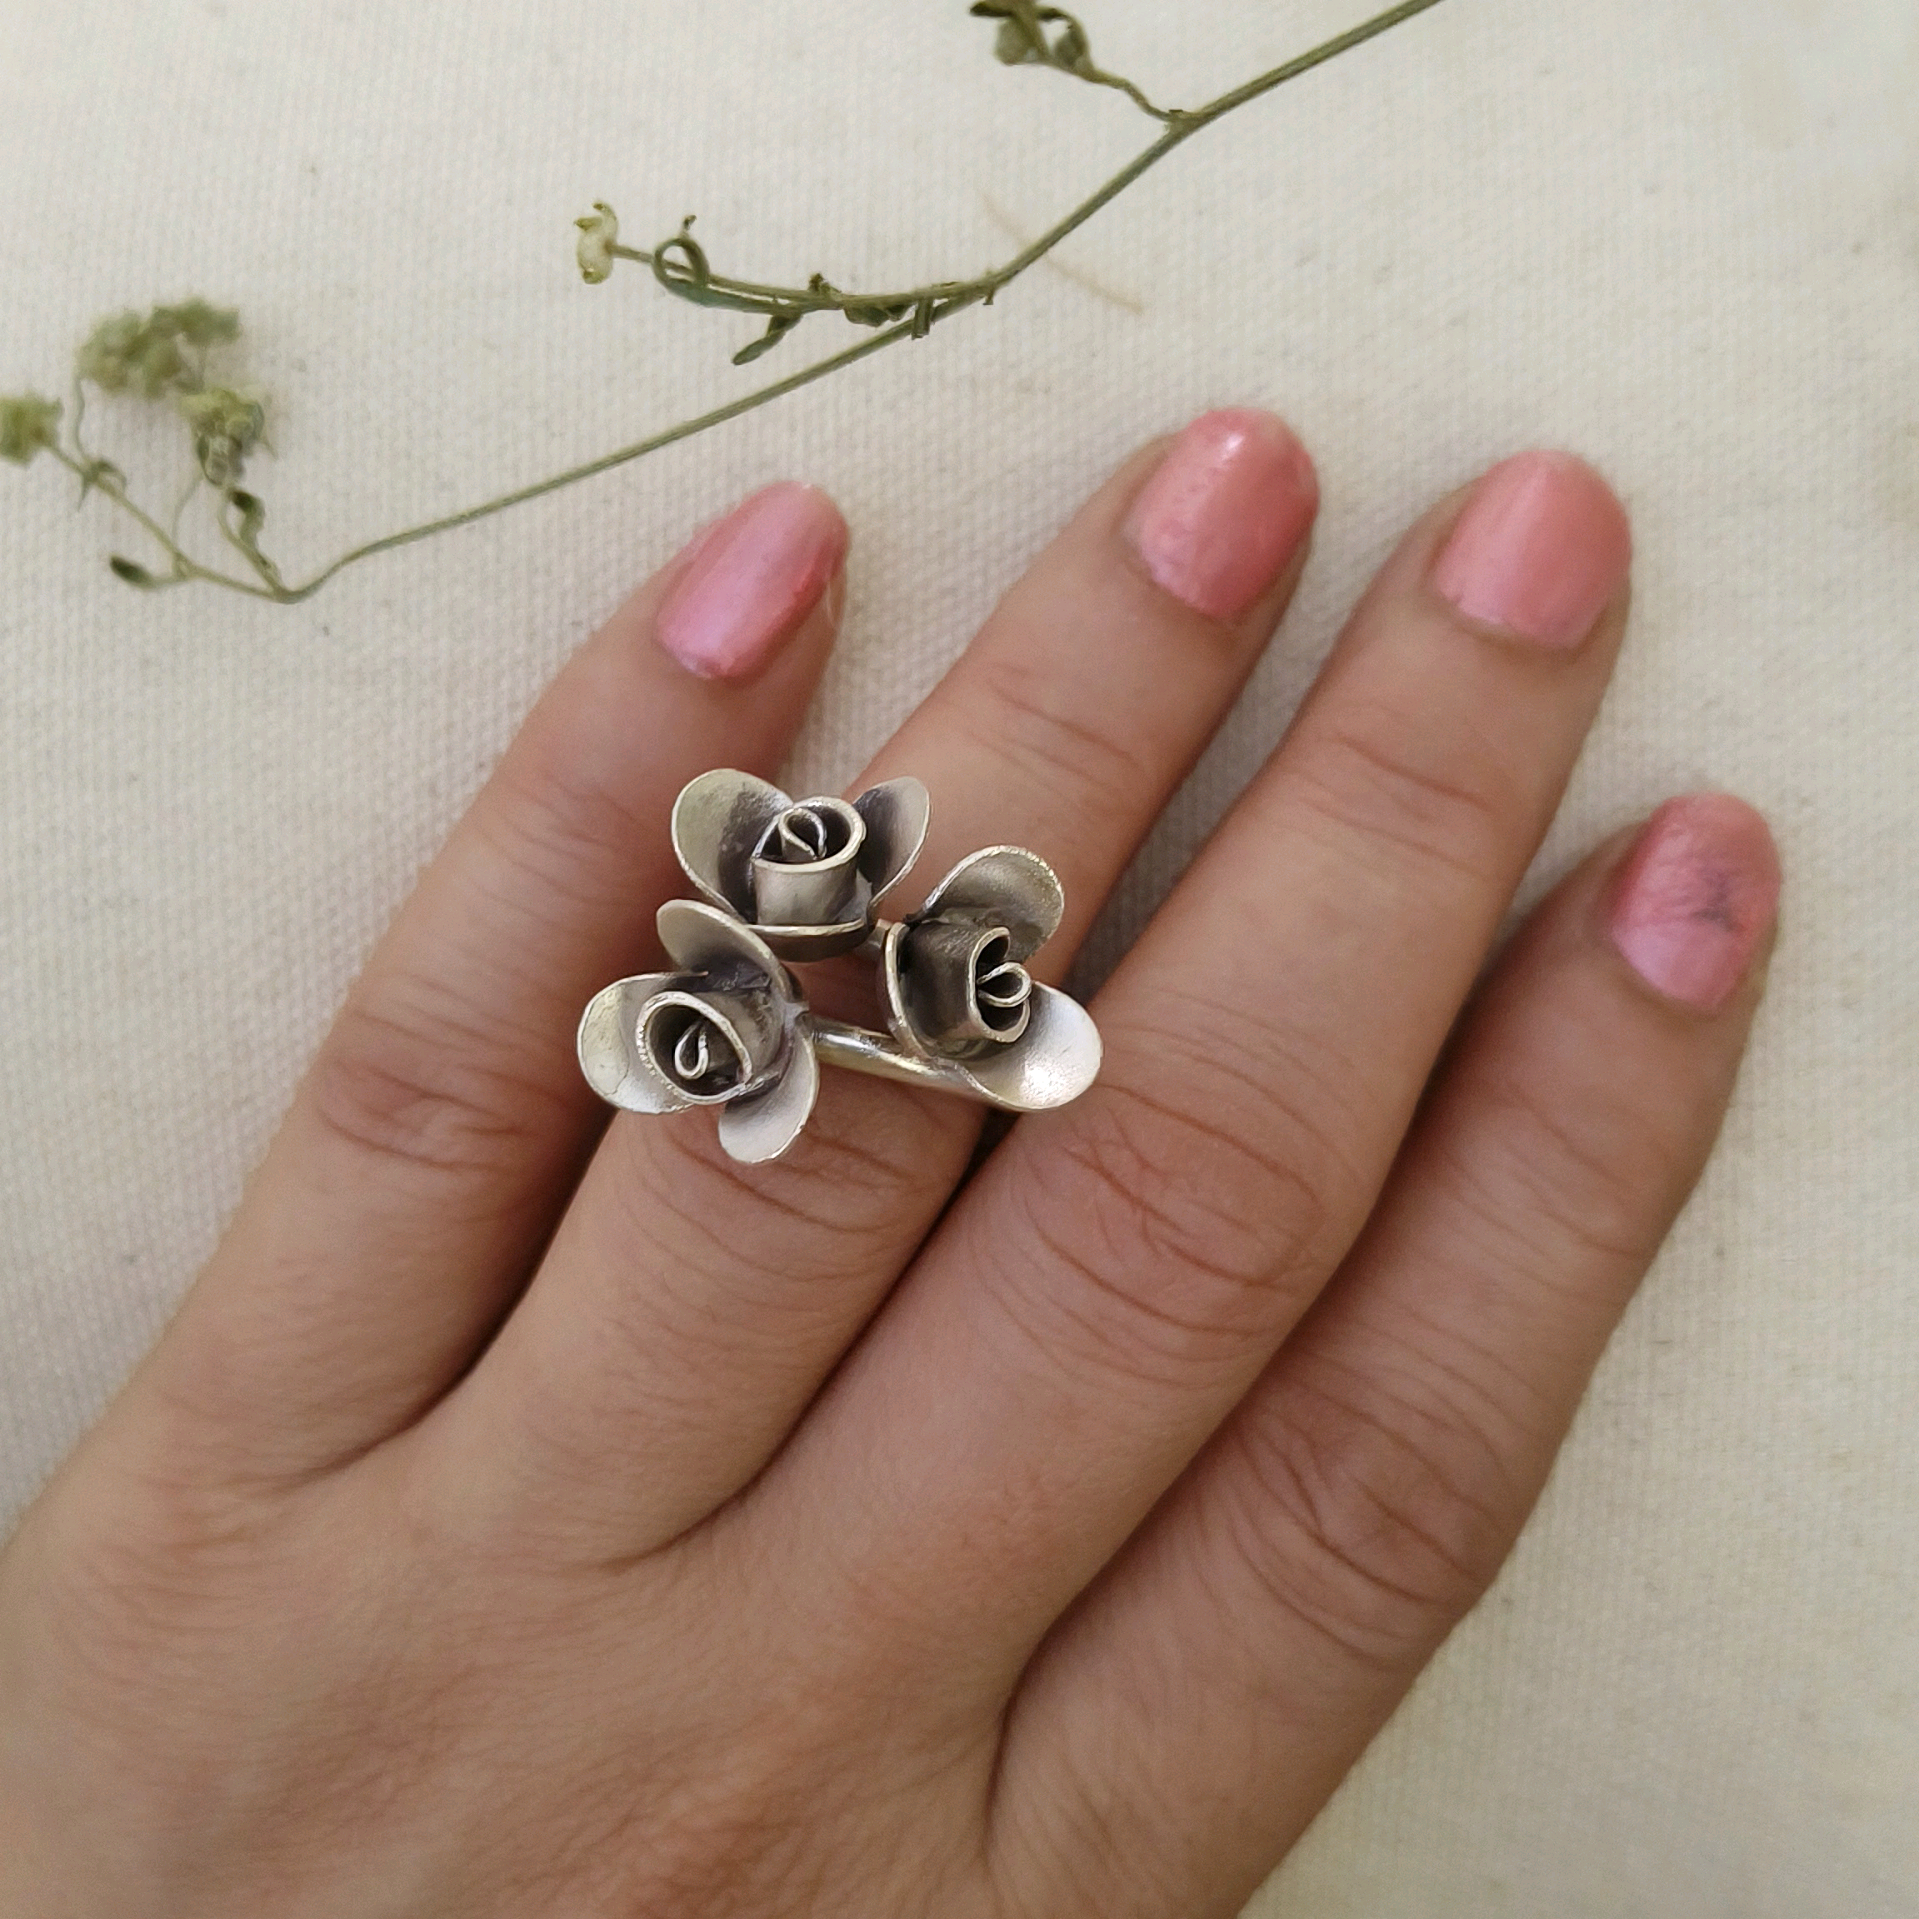 3 rose buds silver ring